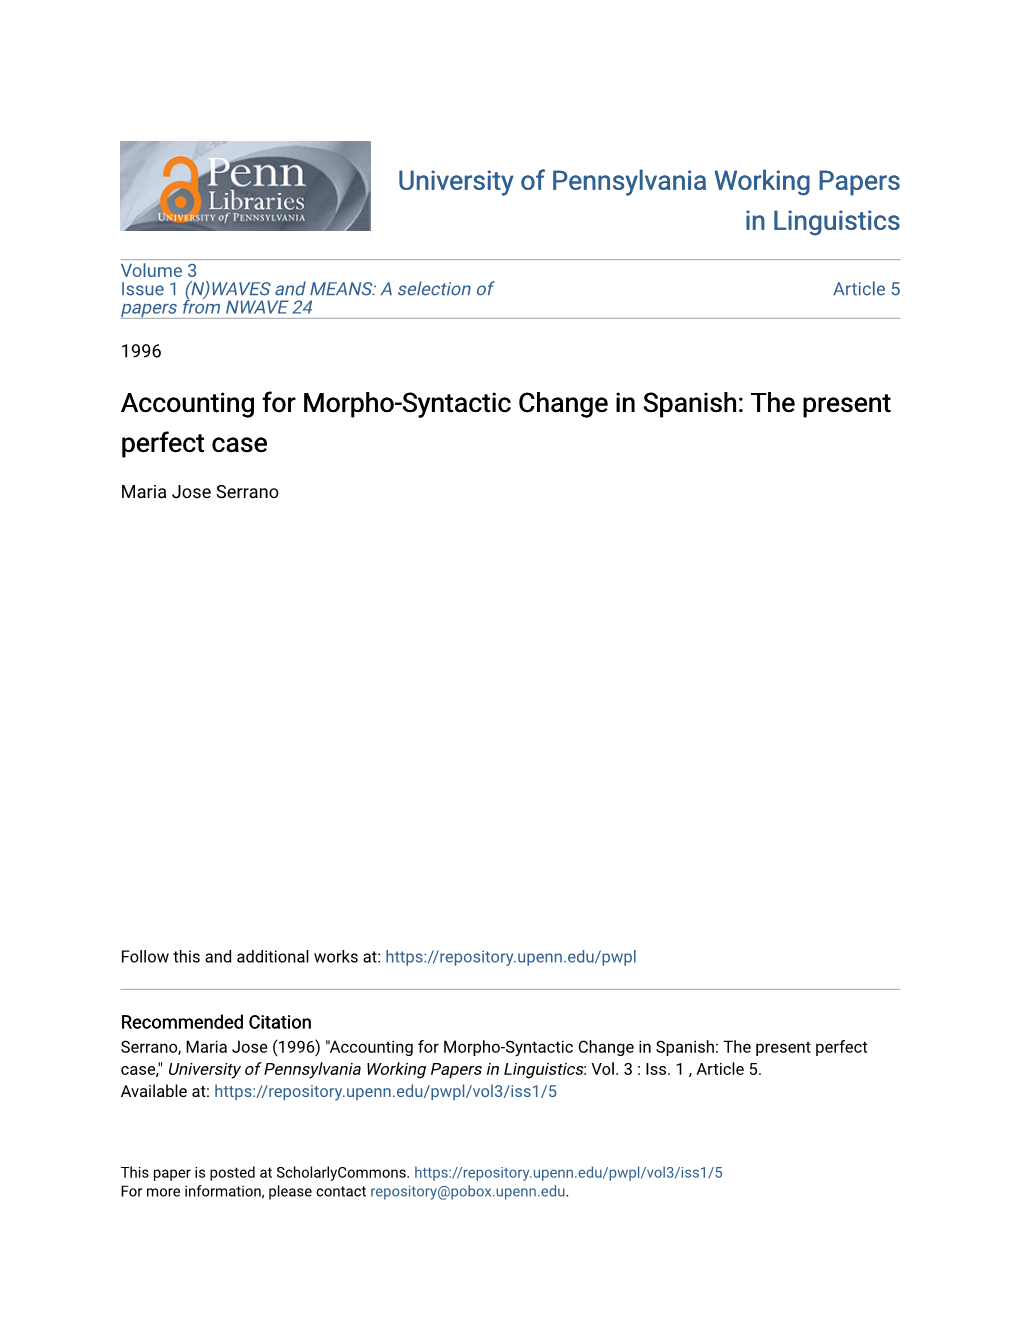 Accounting for Morpho-Syntactic Change in Spanish: the Present Perfect Case